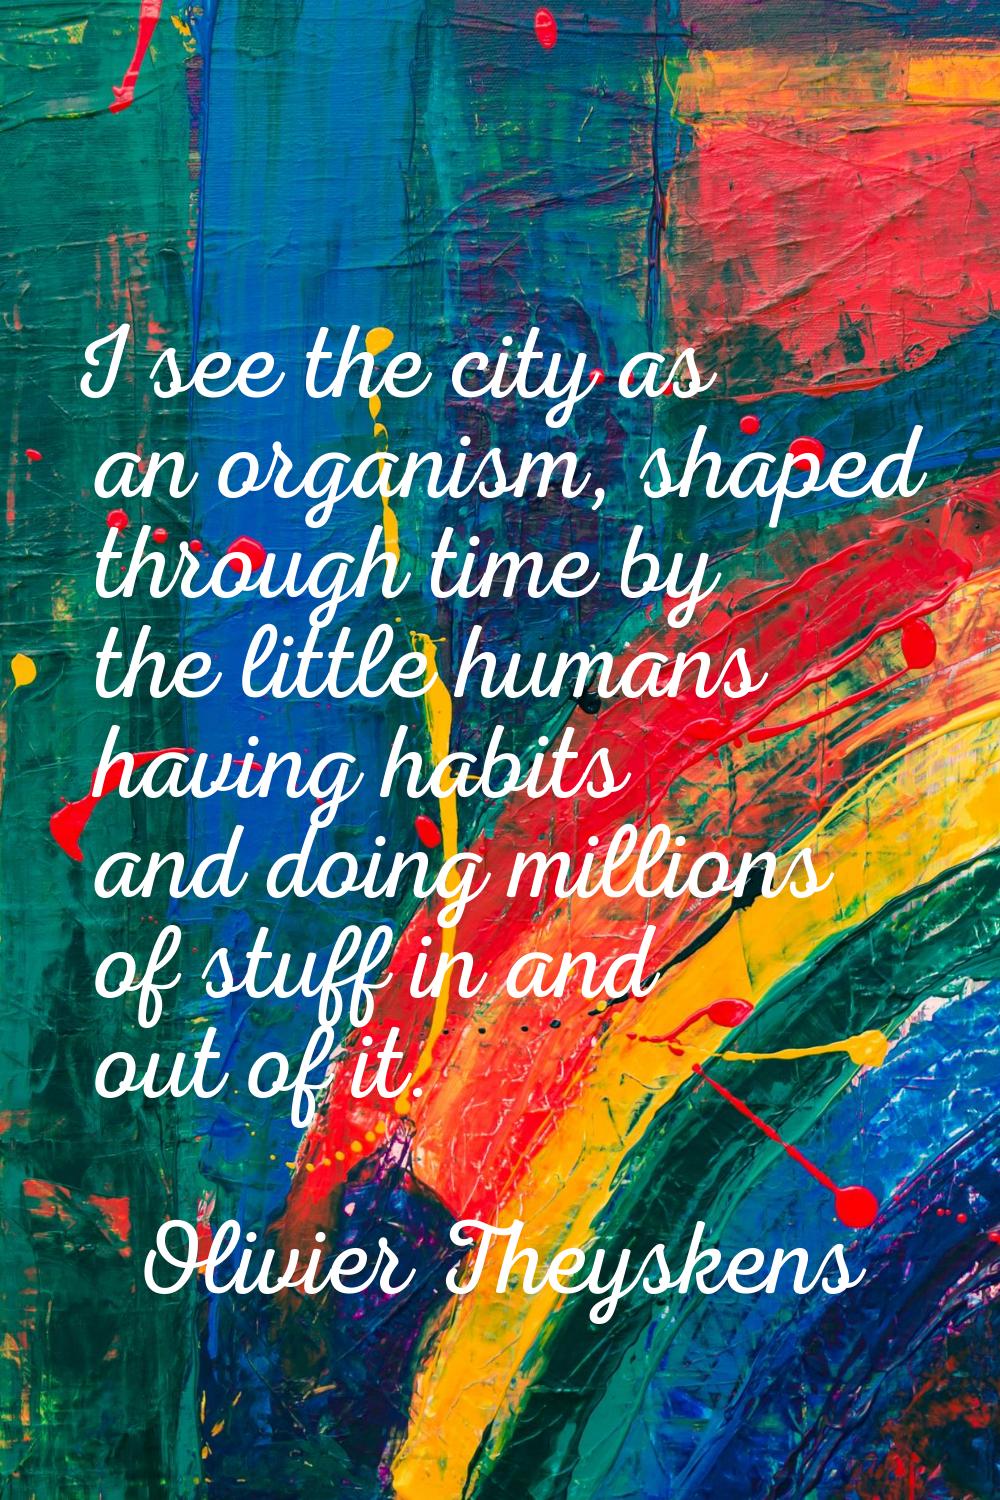 I see the city as an organism, shaped through time by the little humans having habits and doing mil